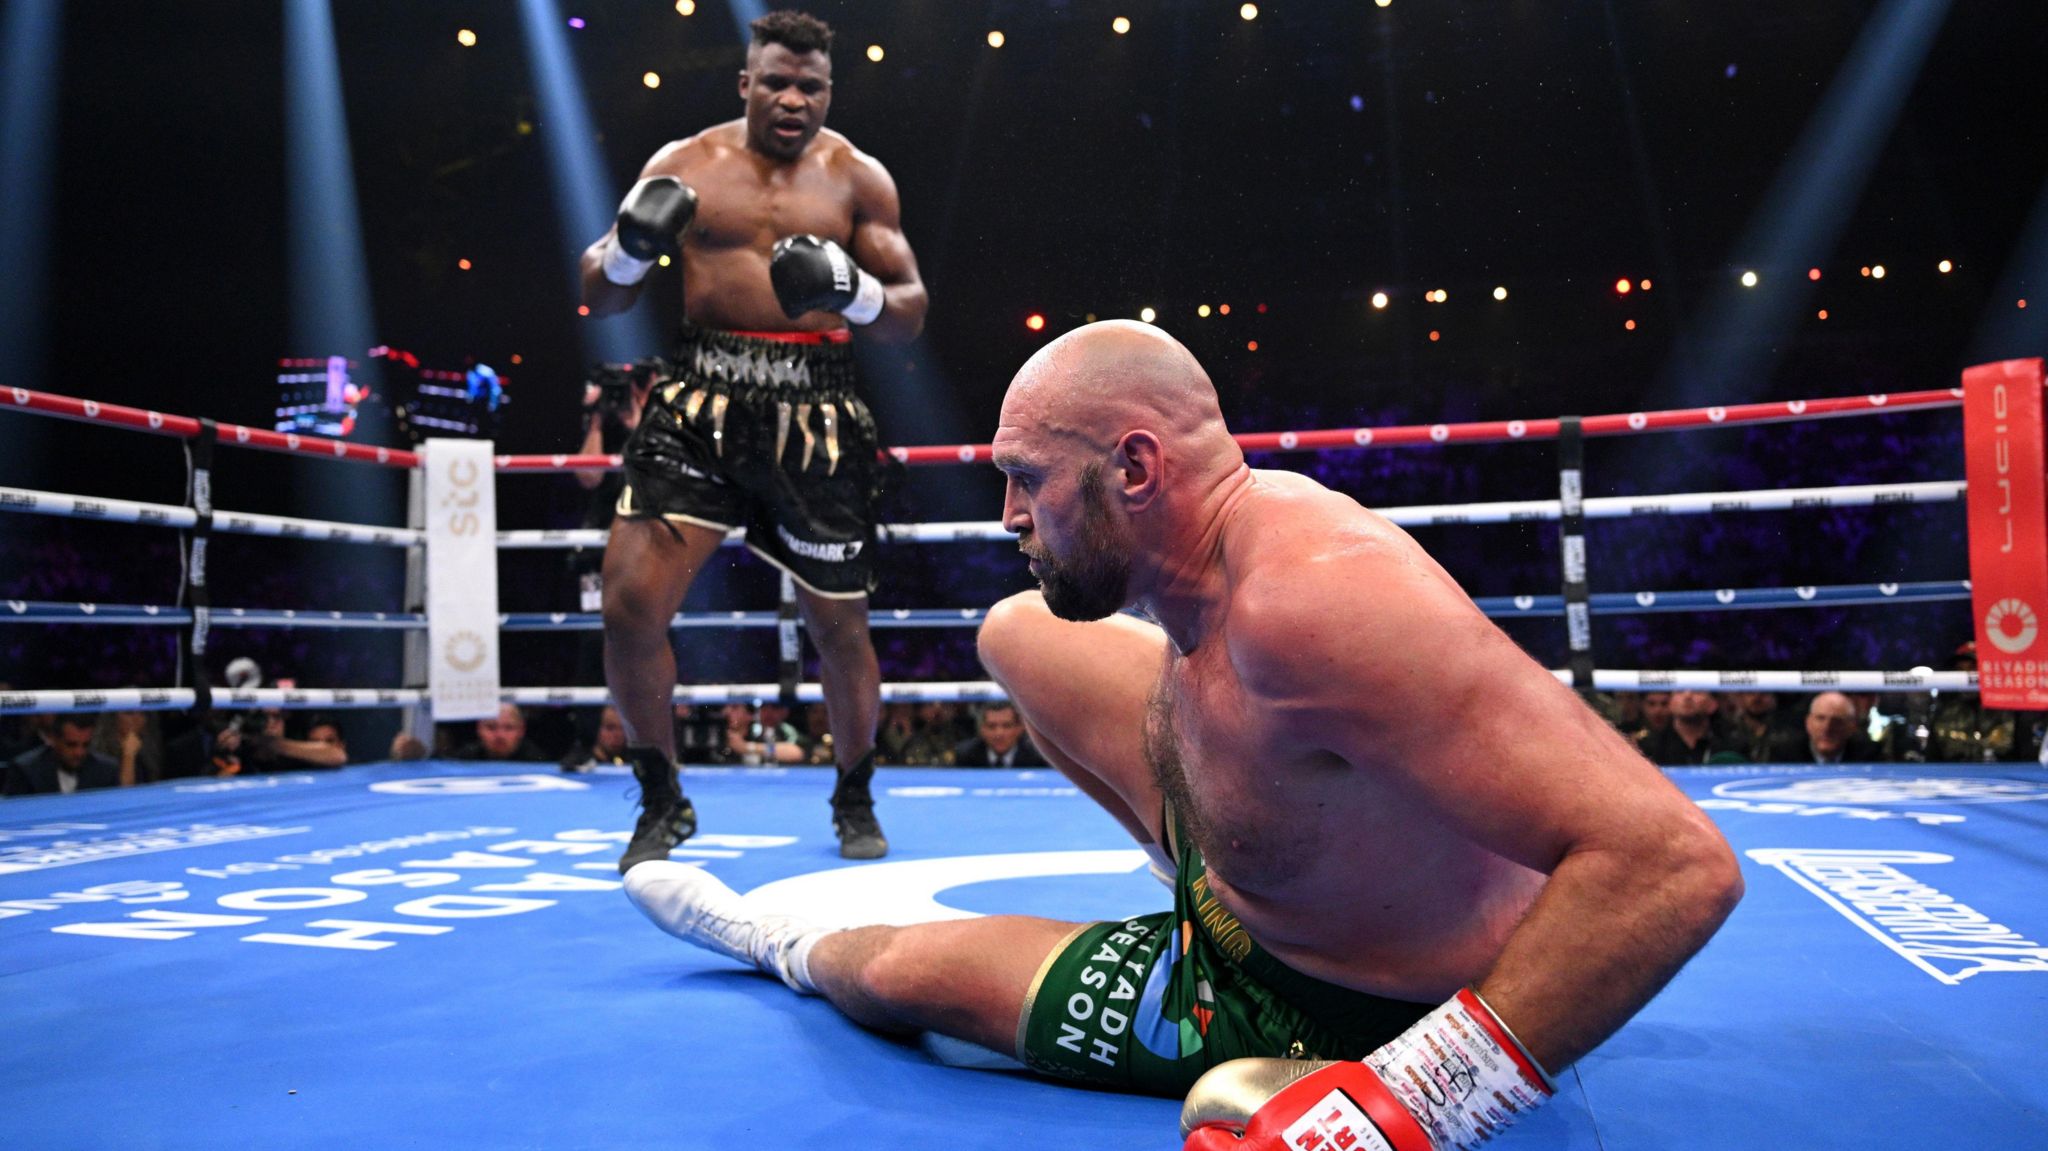 Tyson Fury attempts to get his feet while Francis Ngannou looks on